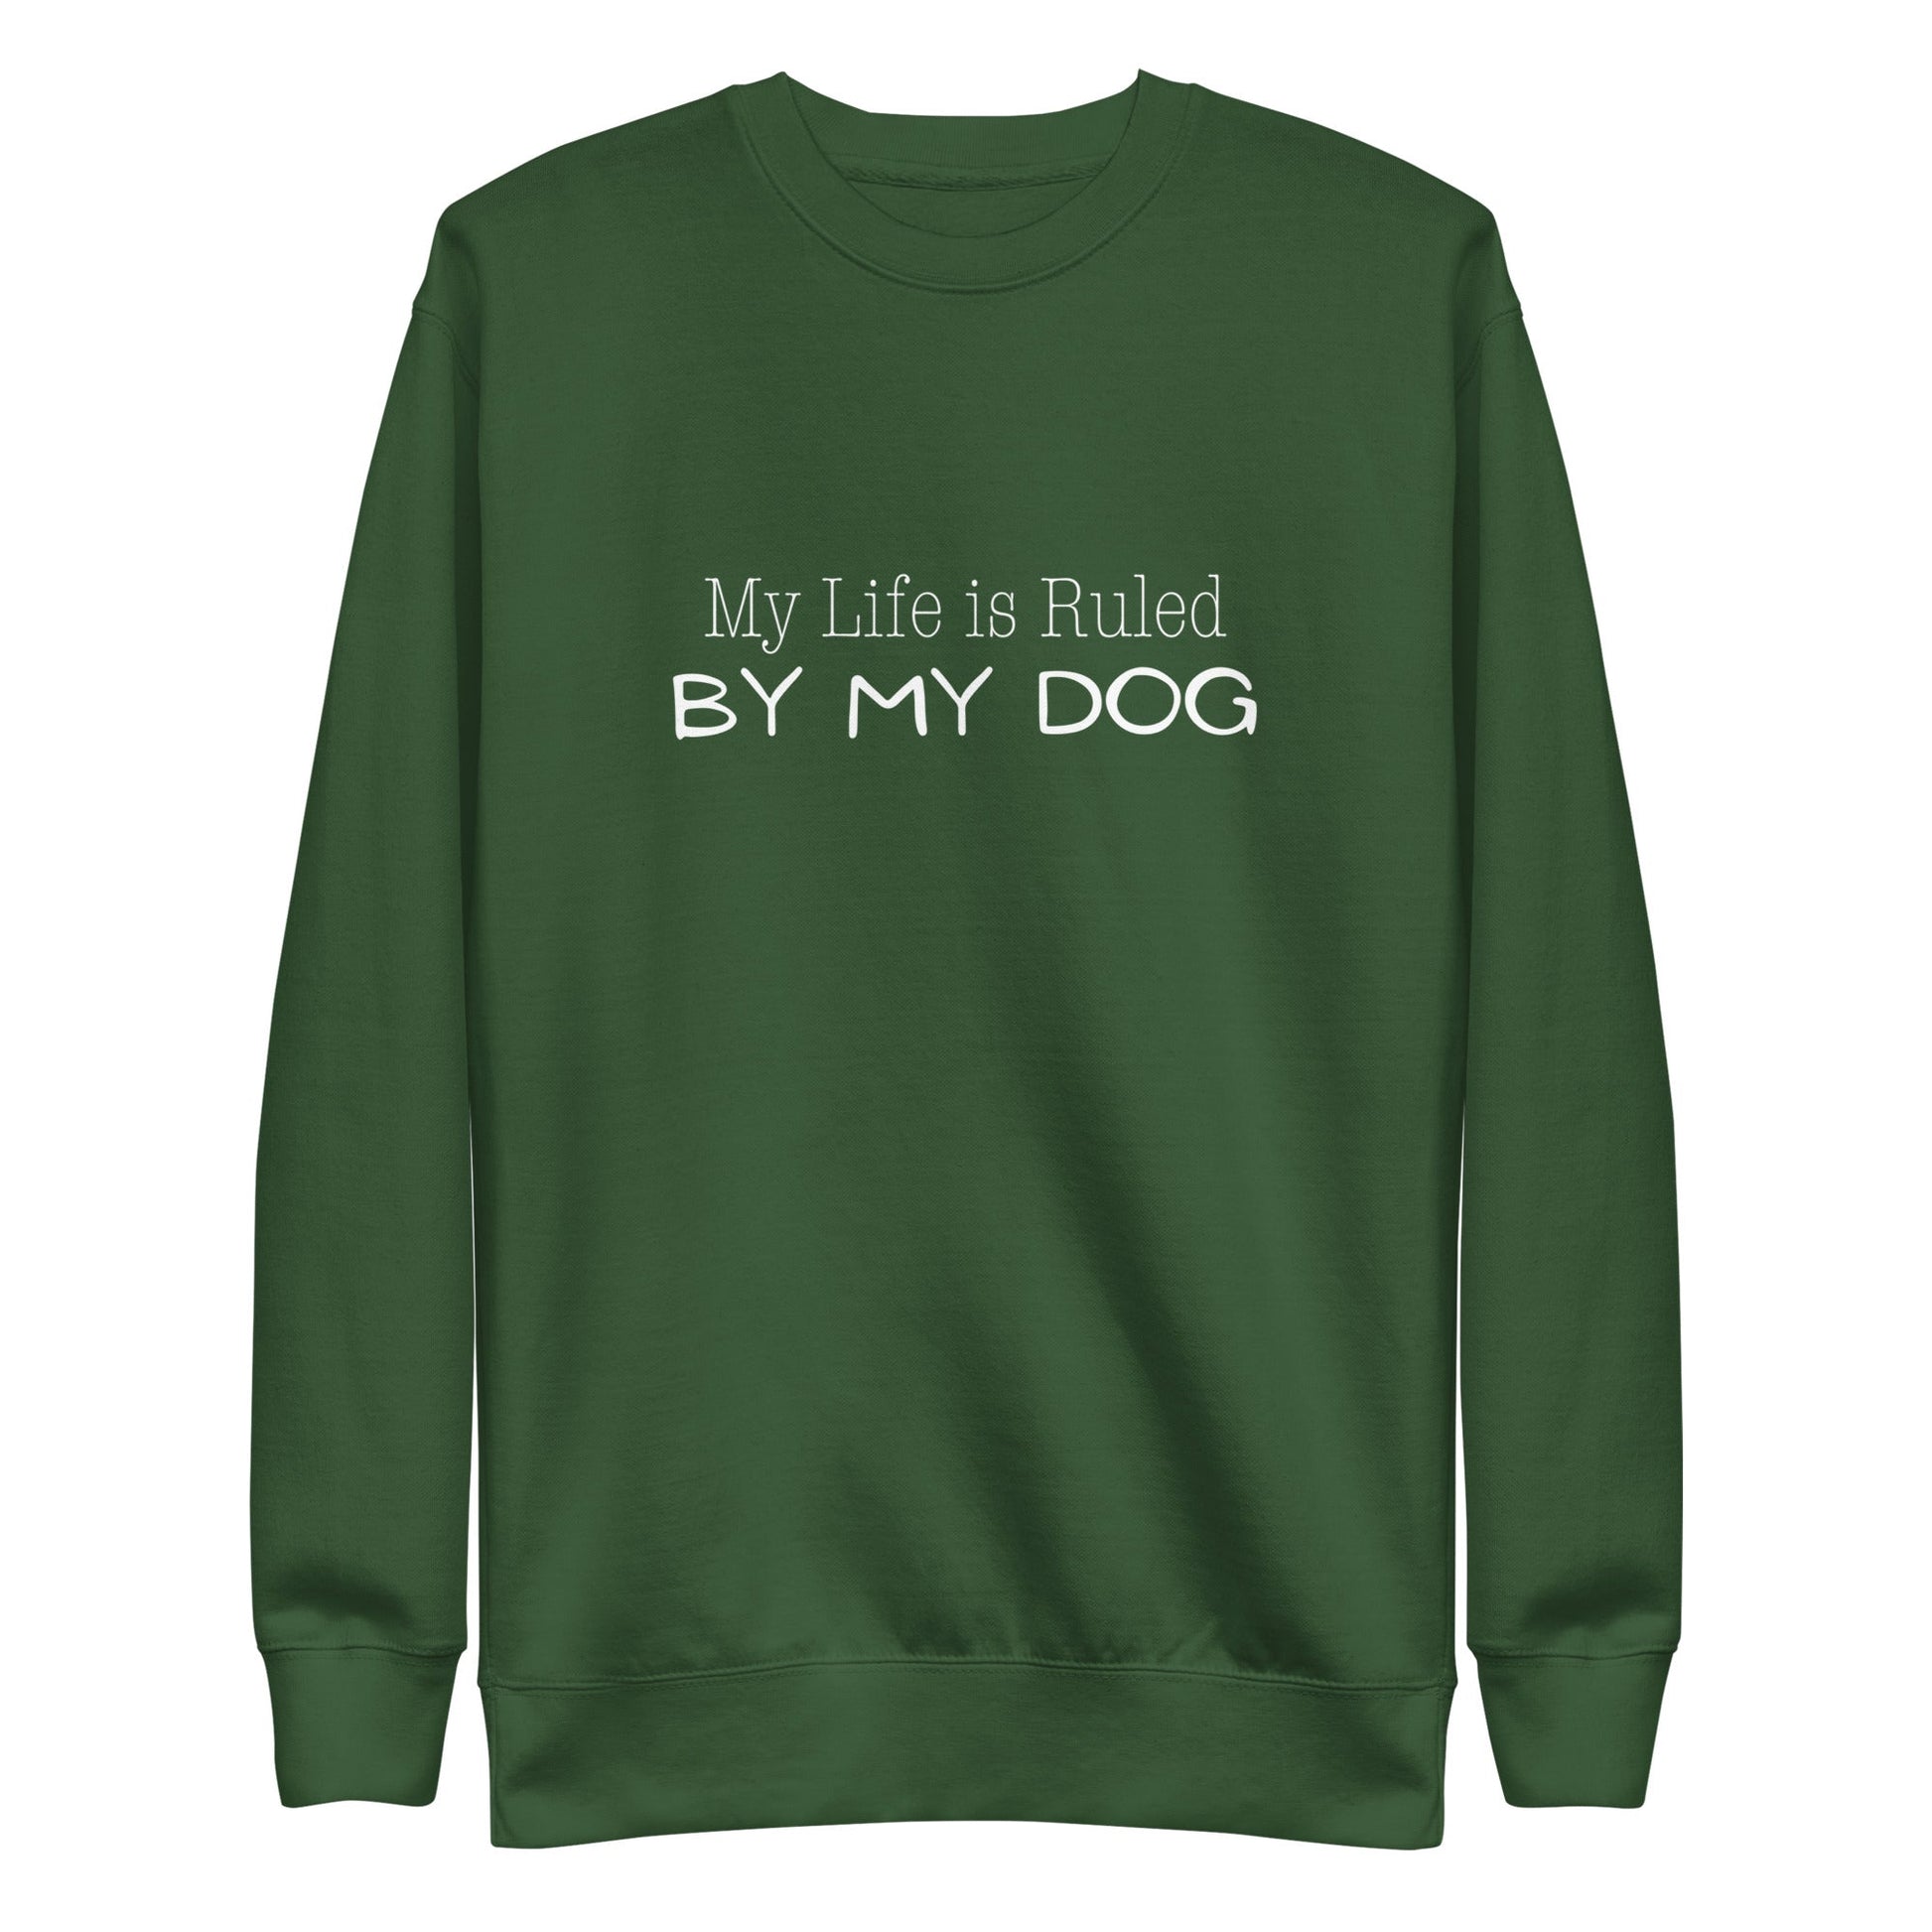 My Life is Ruled by Dog Sweatshirt - Forest Green / S